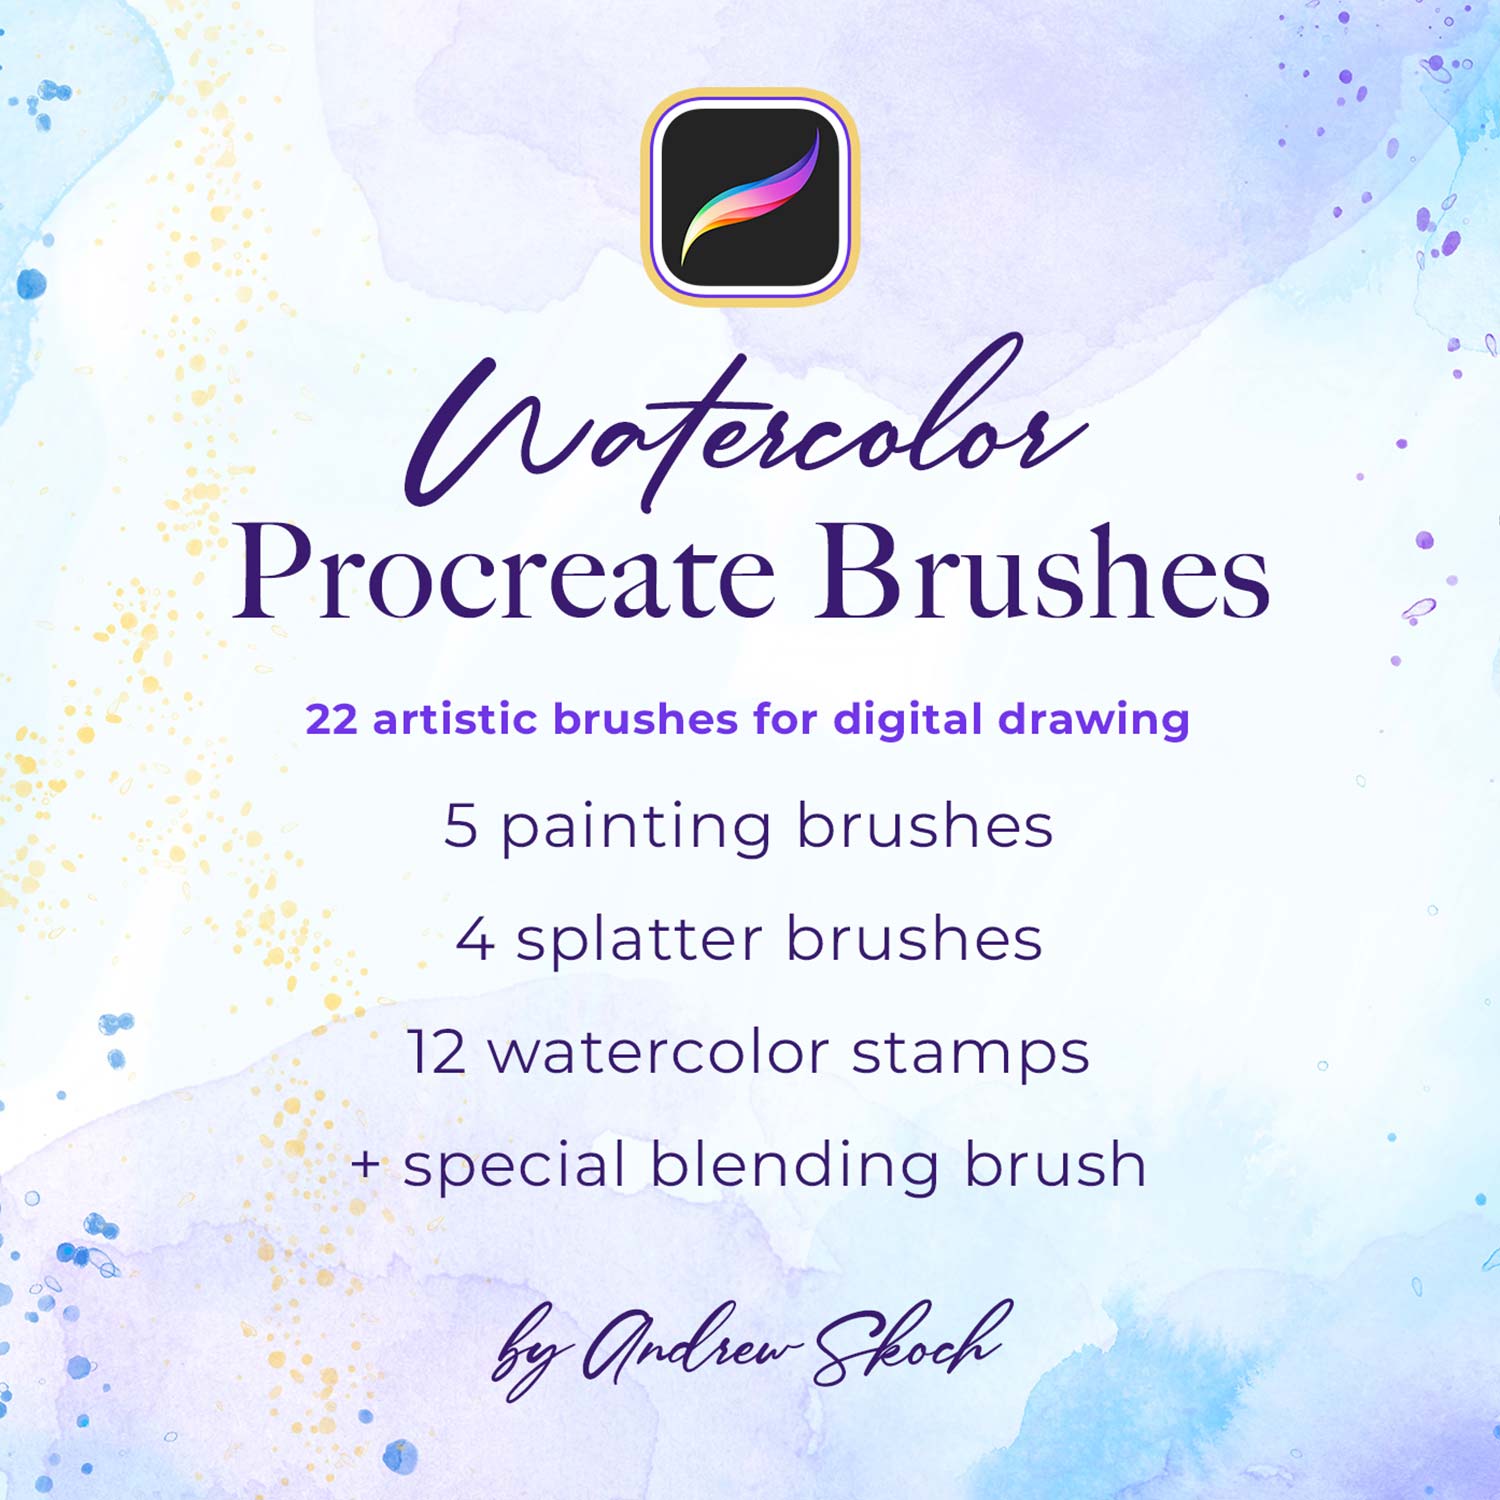 Watercolor Procreate Brushes preview image.